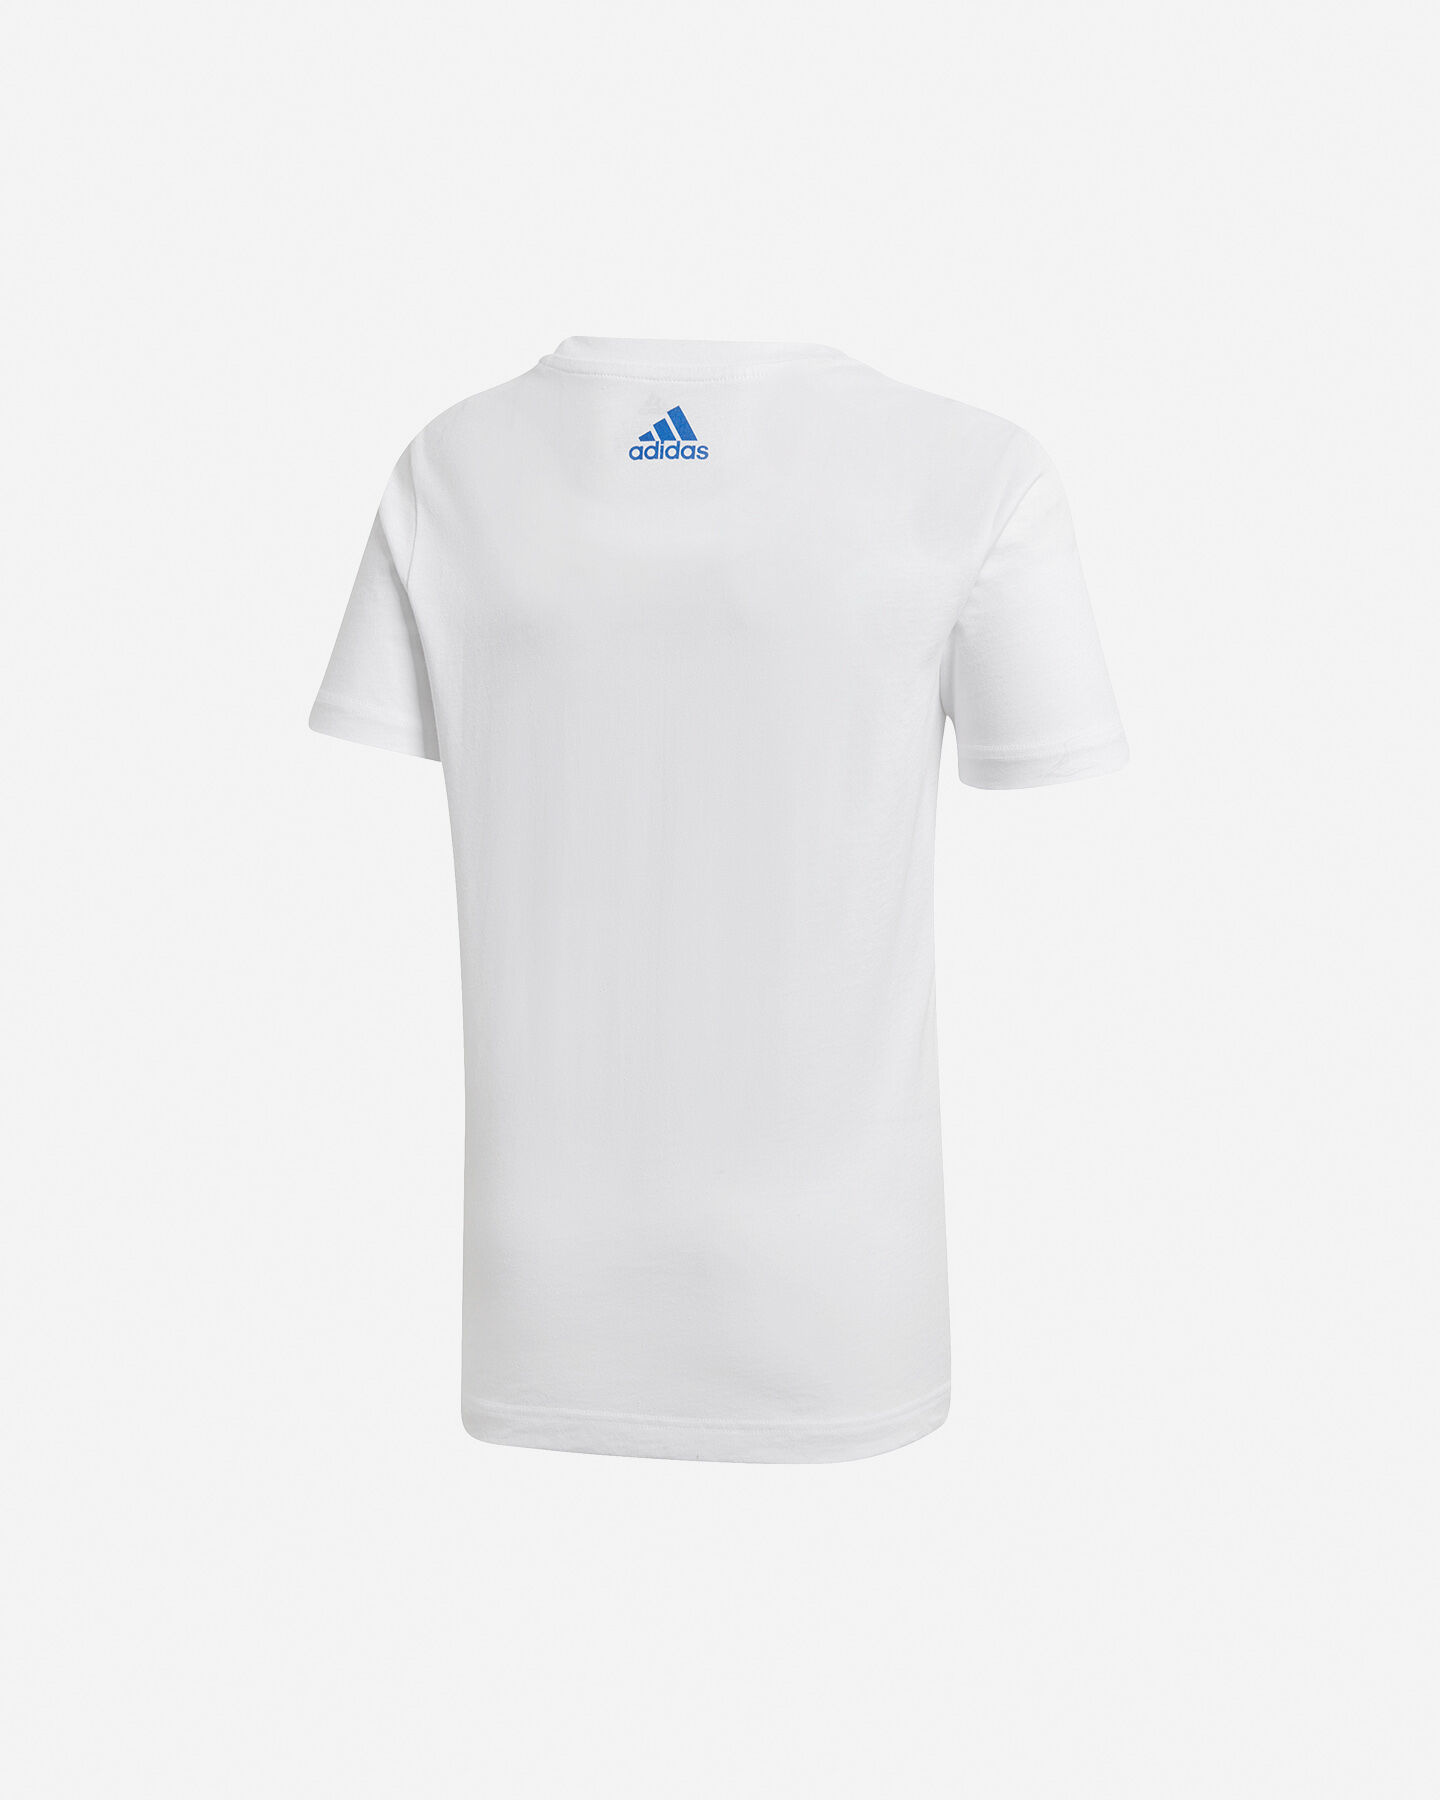  T-Shirt ADIDAS GRAPHIC JR S5211507|UNI|7-8A scatto 1